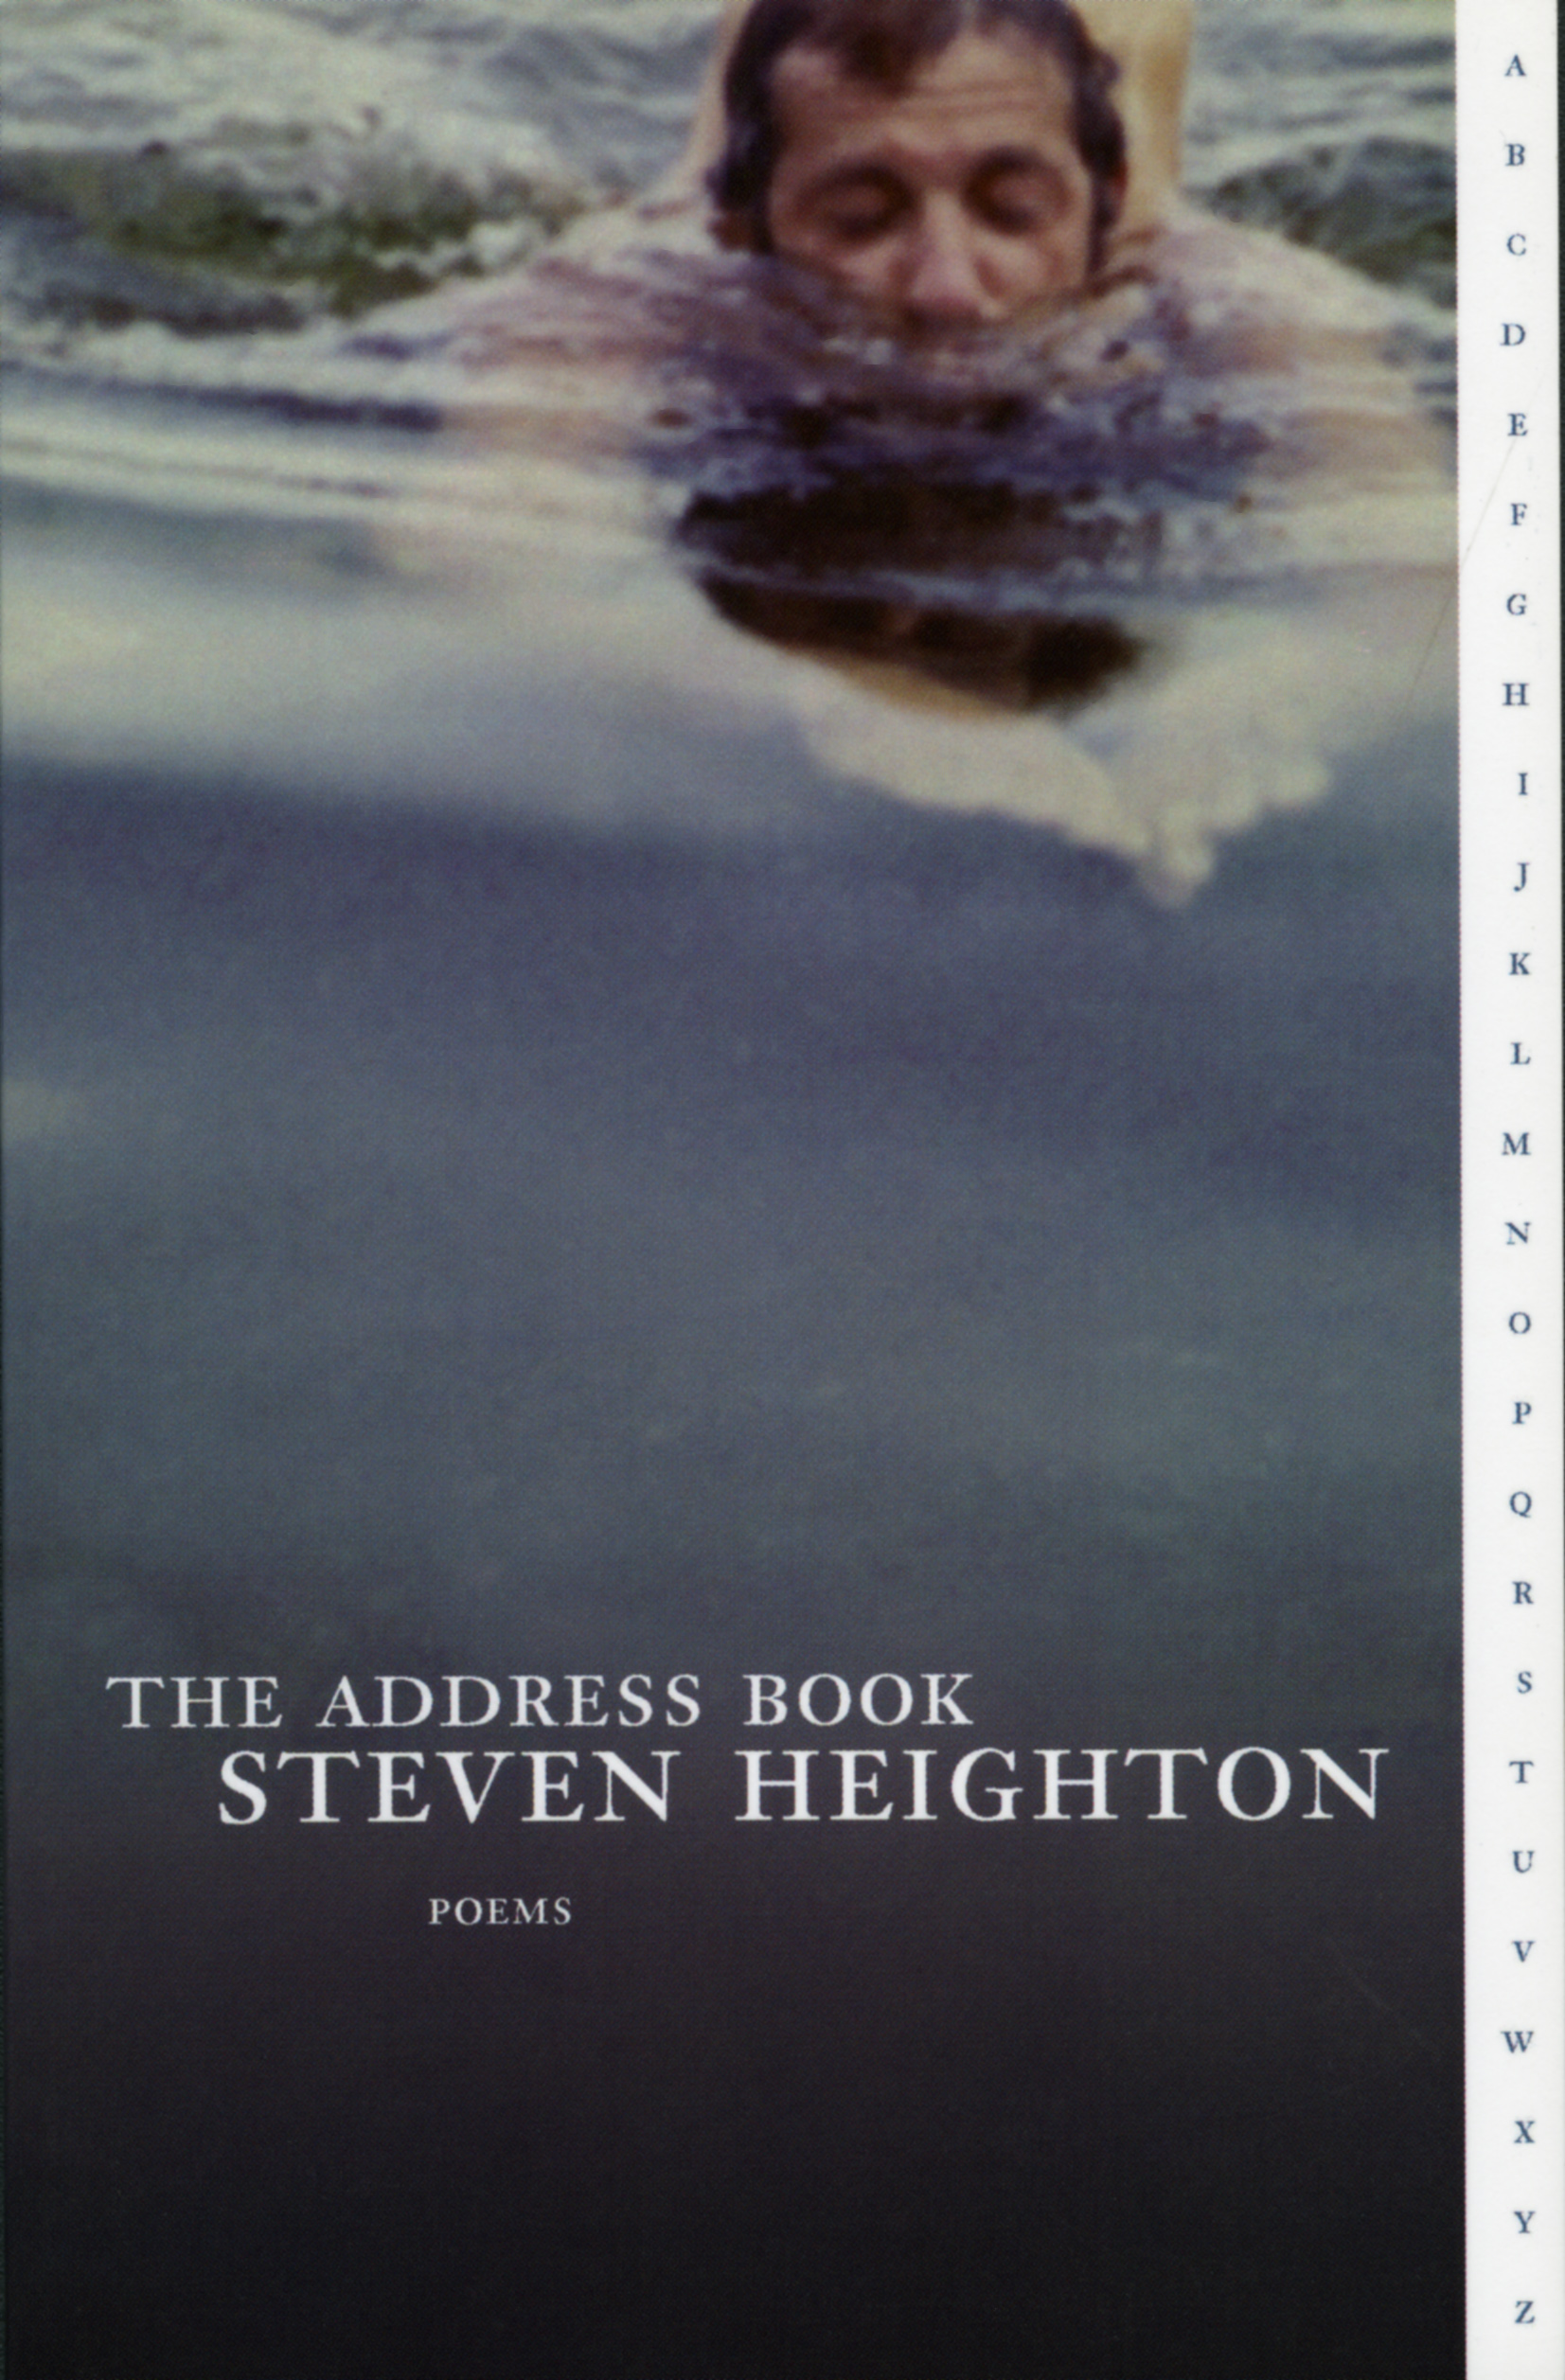 Cover Image of The Address Book